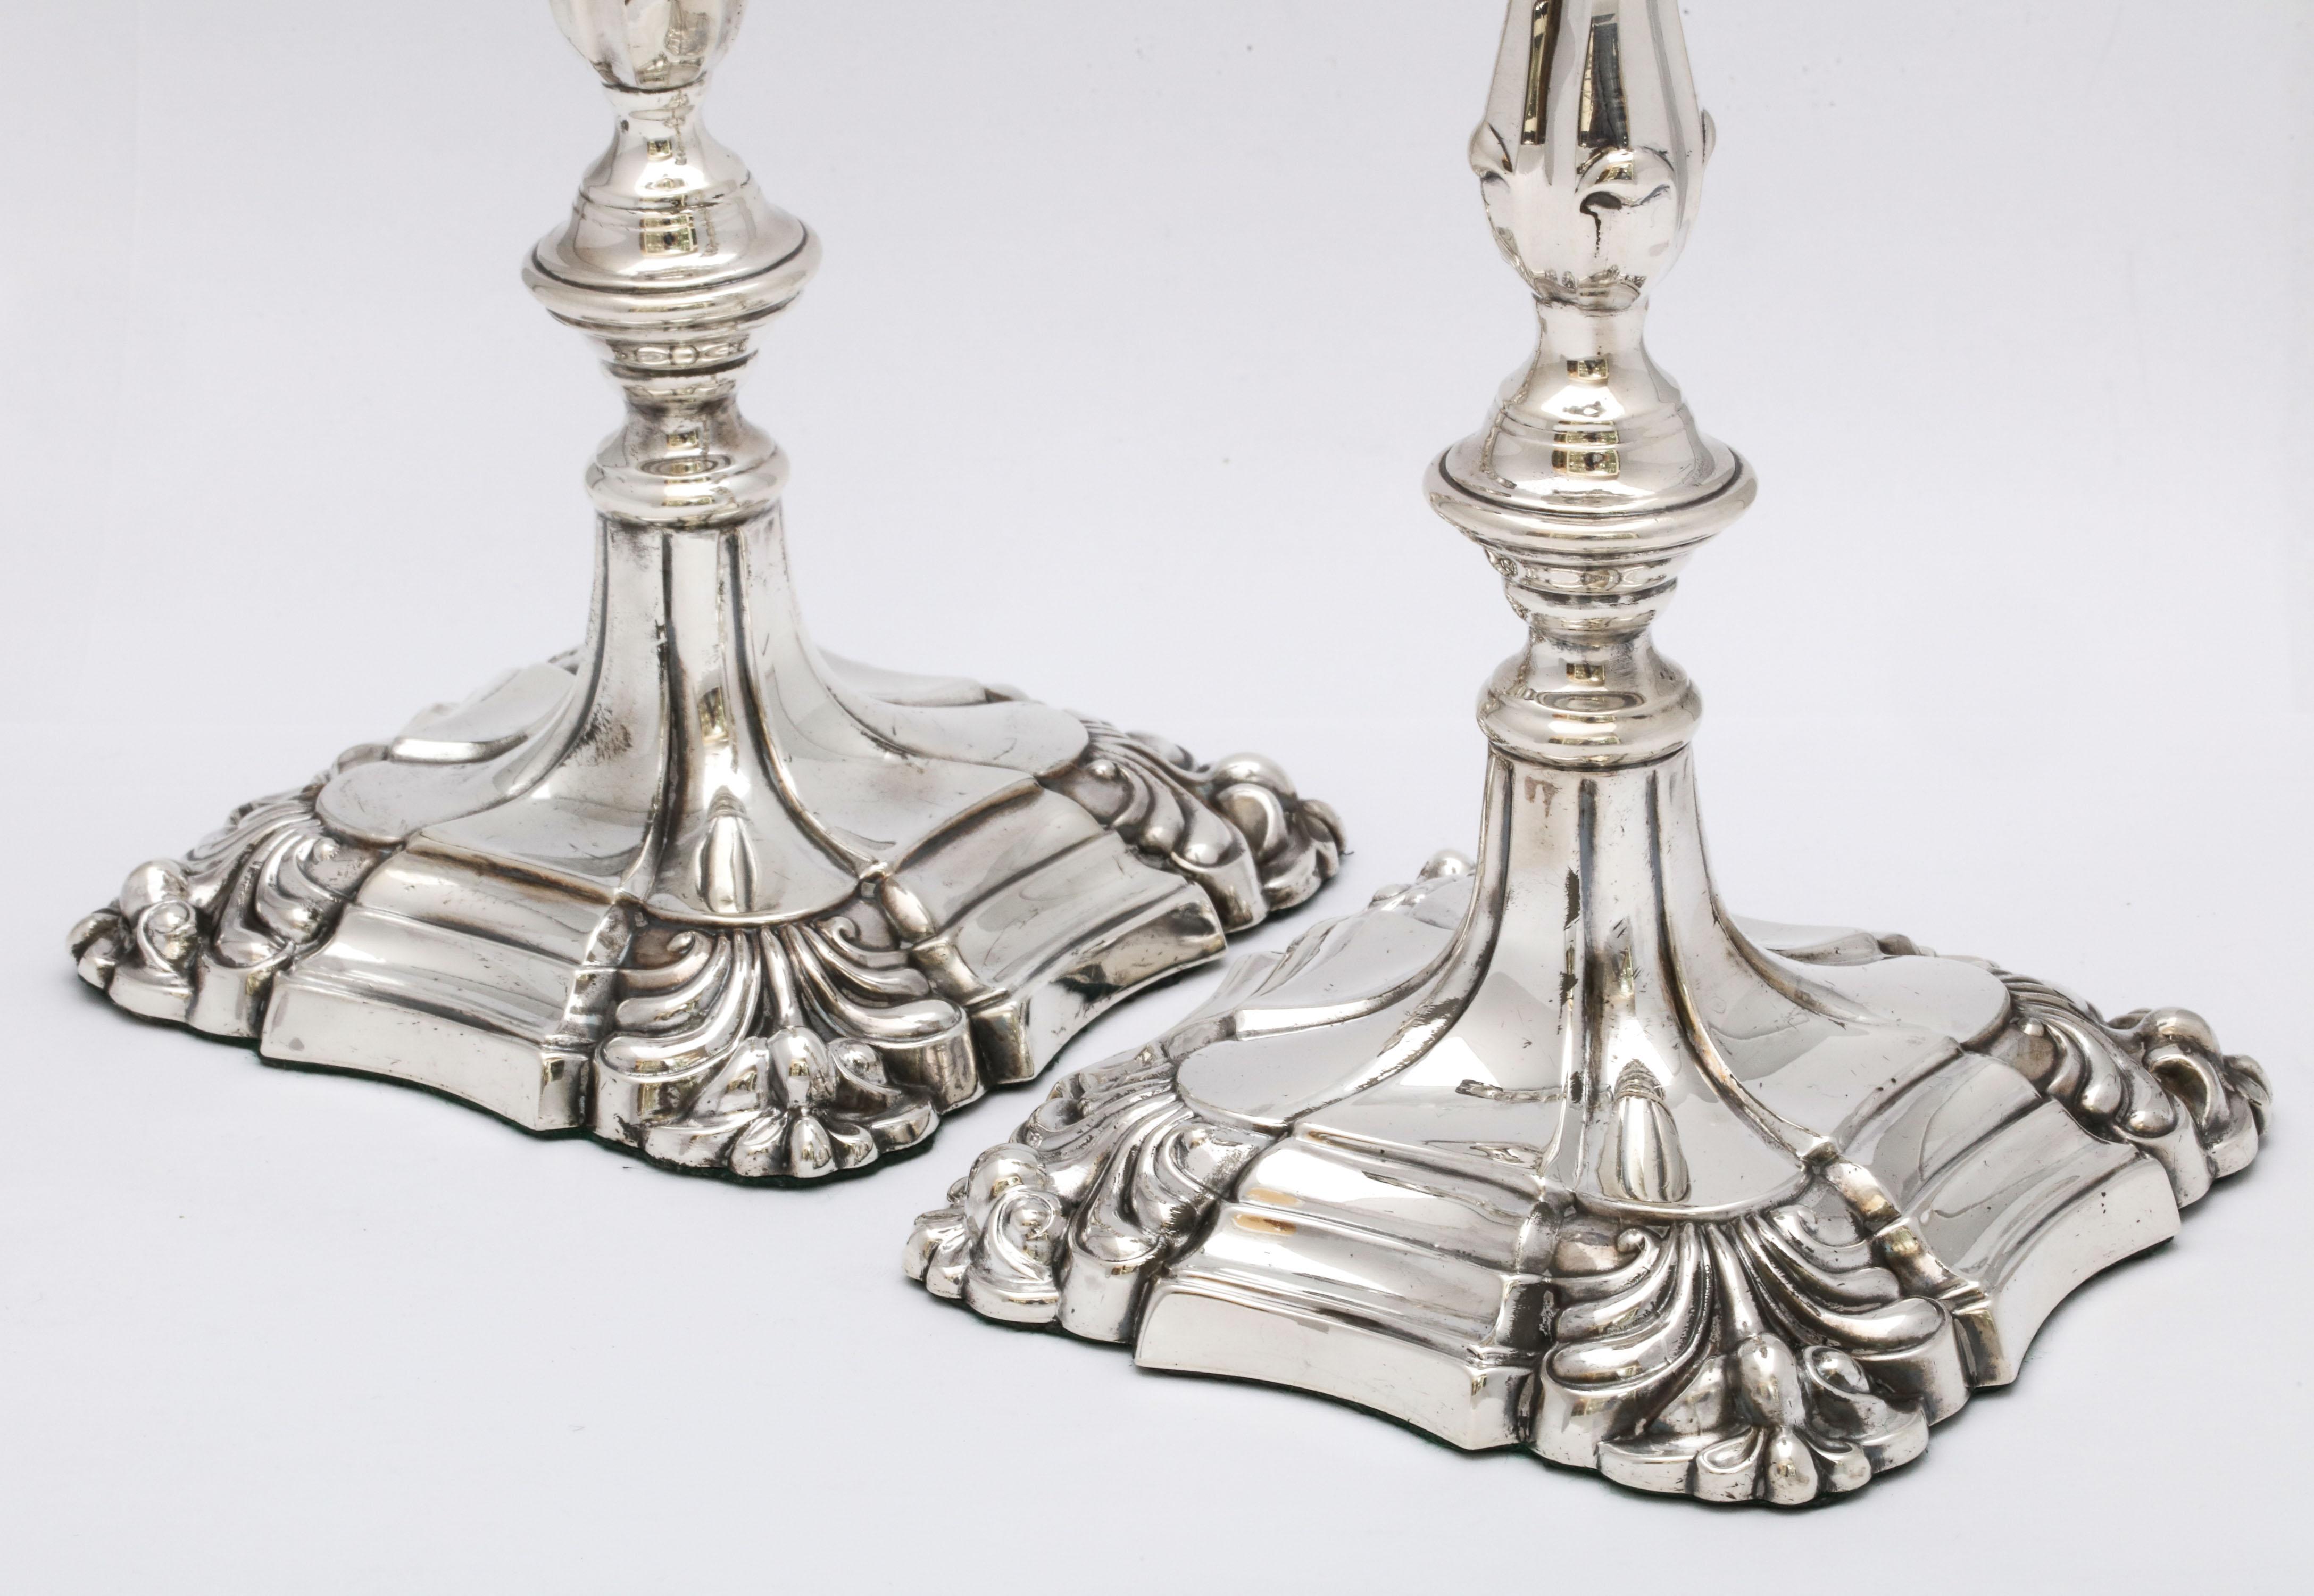 George III Pair of Sterling Silver Georgian-Style Candlesticks by Walker and Hall